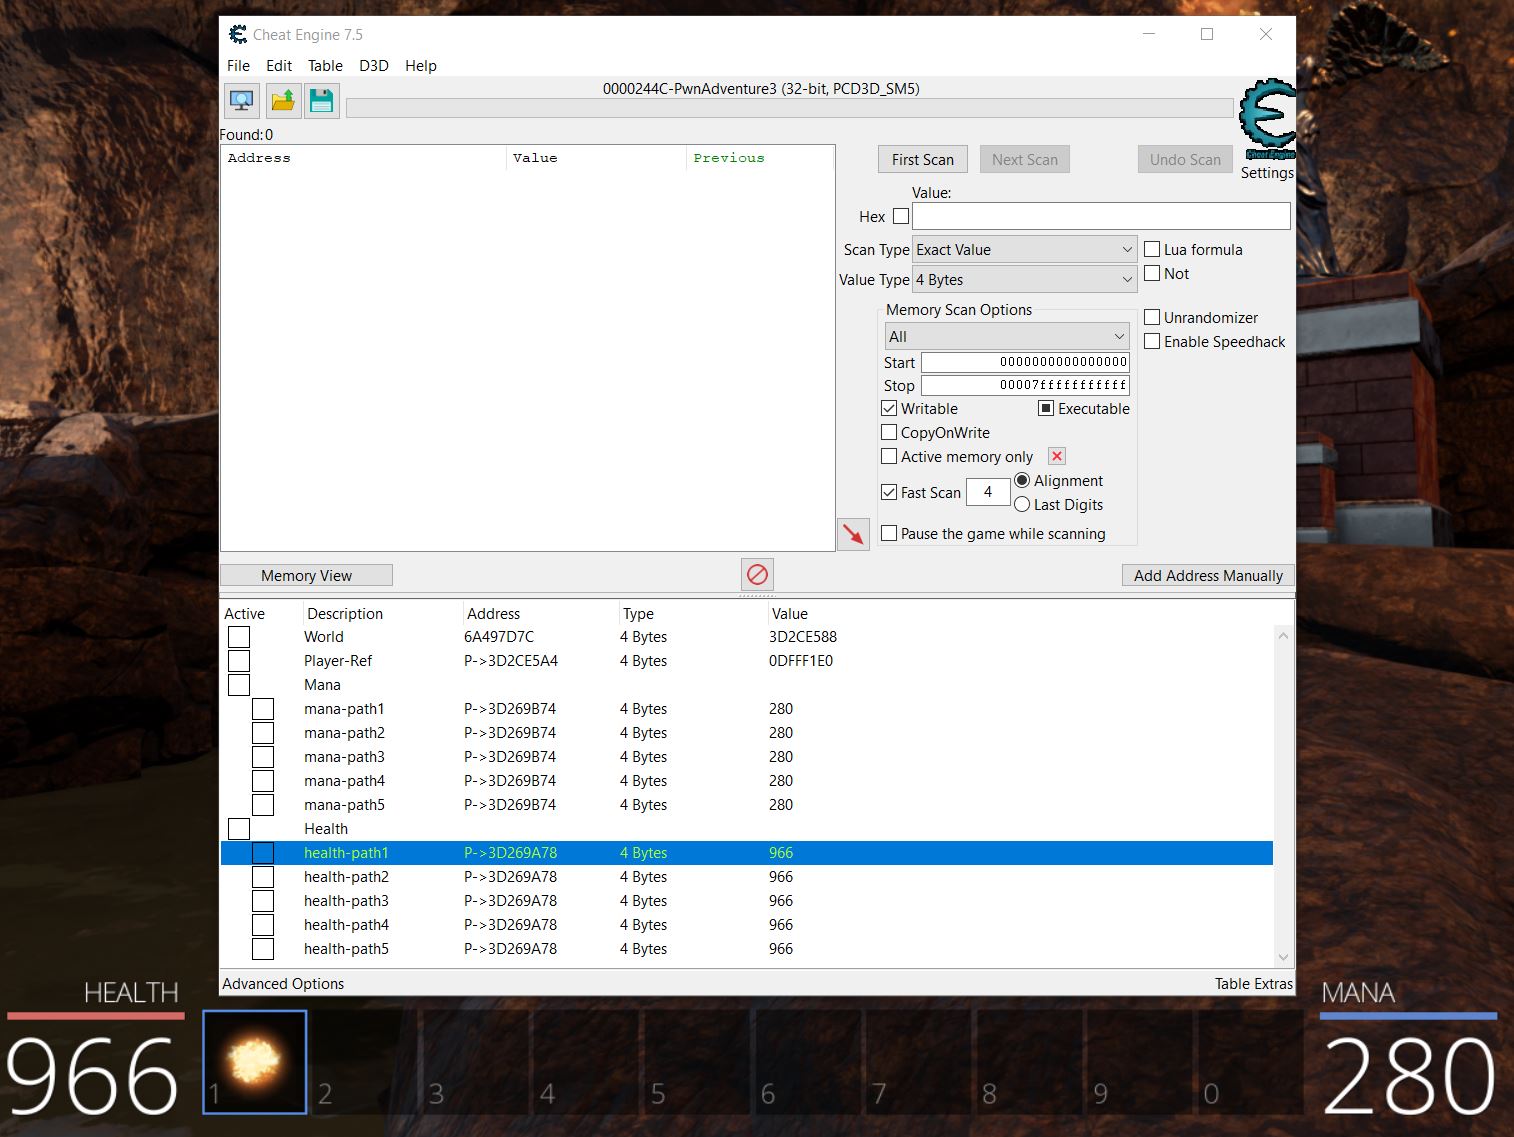 Cheat Engine :: View topic - Pointer problem for Mad Max